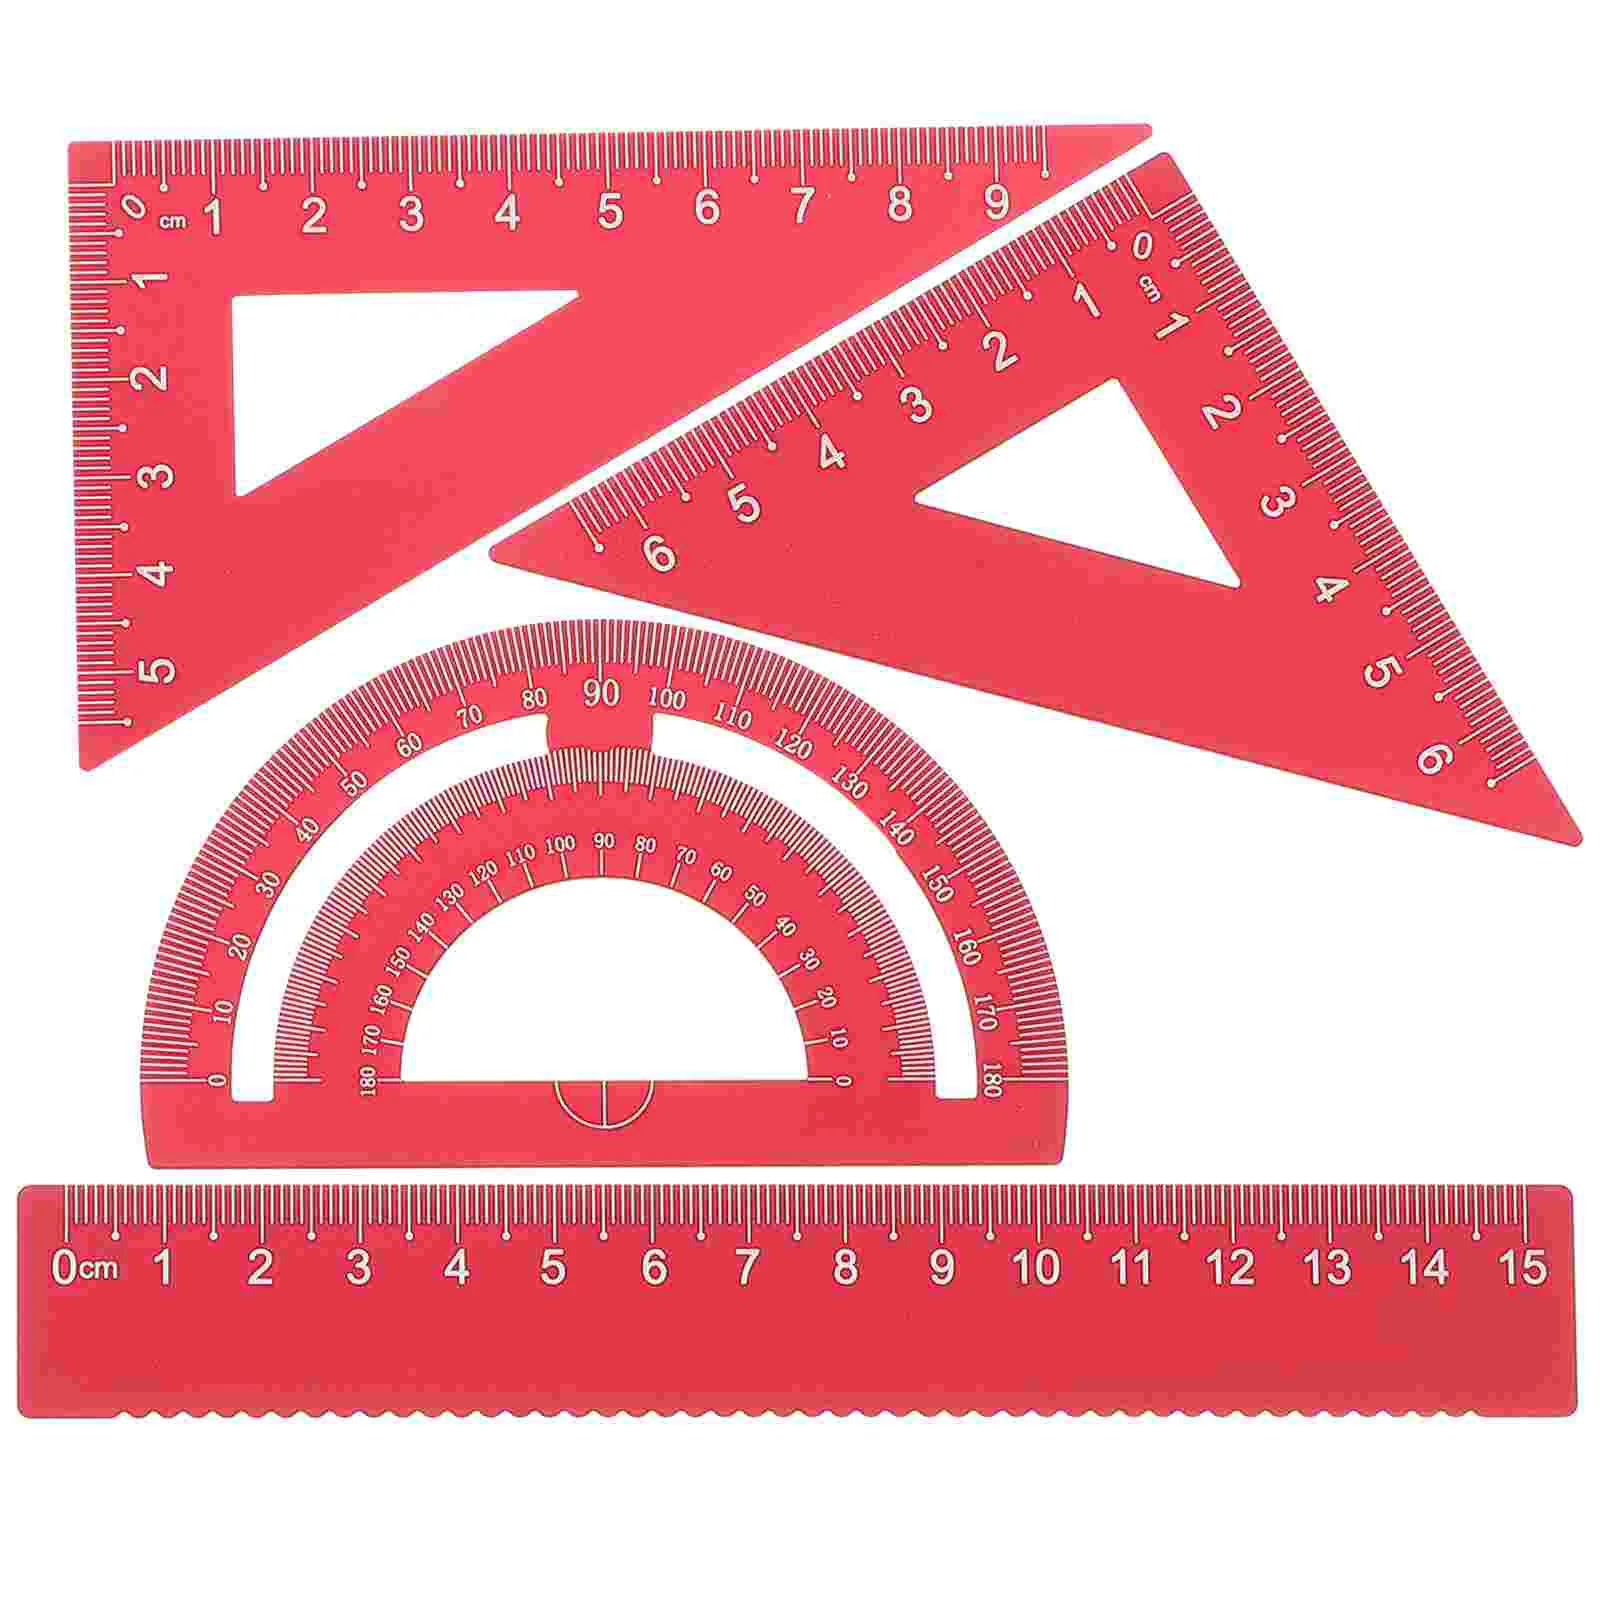 4 Pack Geometry Set Metal Triangle Ruler Protractor Straight Ruler Tool Set Math Protractor School and Office Supplies for Kids new plastic ruler pp protractor students maths geometry triangle ruler set office school supplies 4pcs set